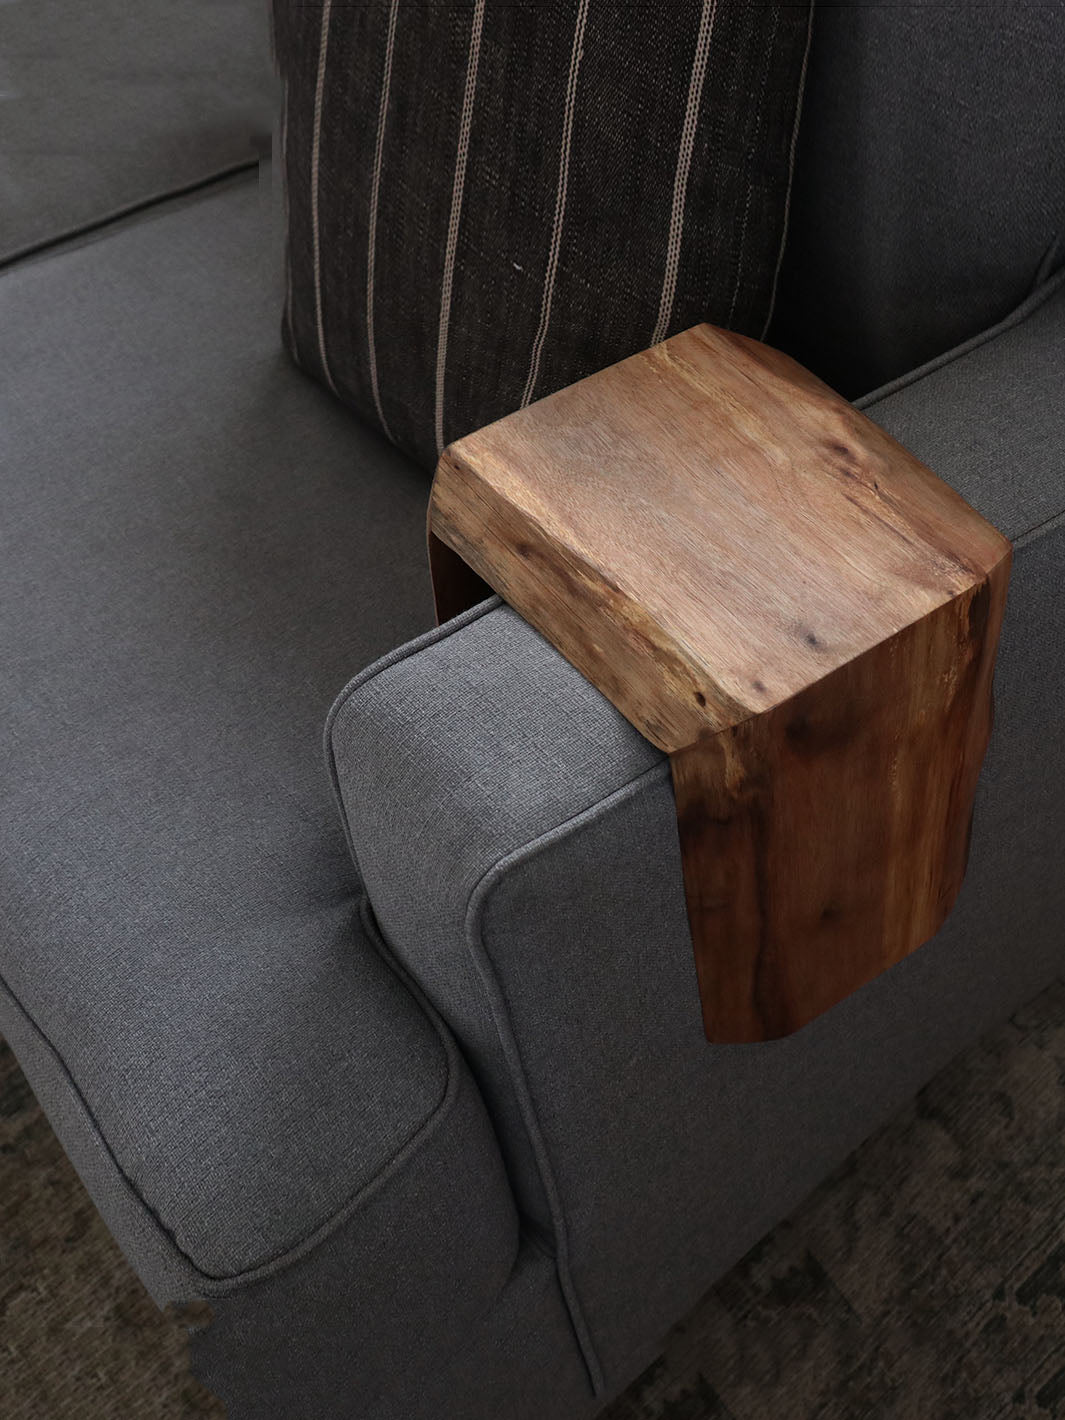 Earthly Comfort Live Edge Walnut Wood Armrest Table Earthly Comfort Coffee Tables 6